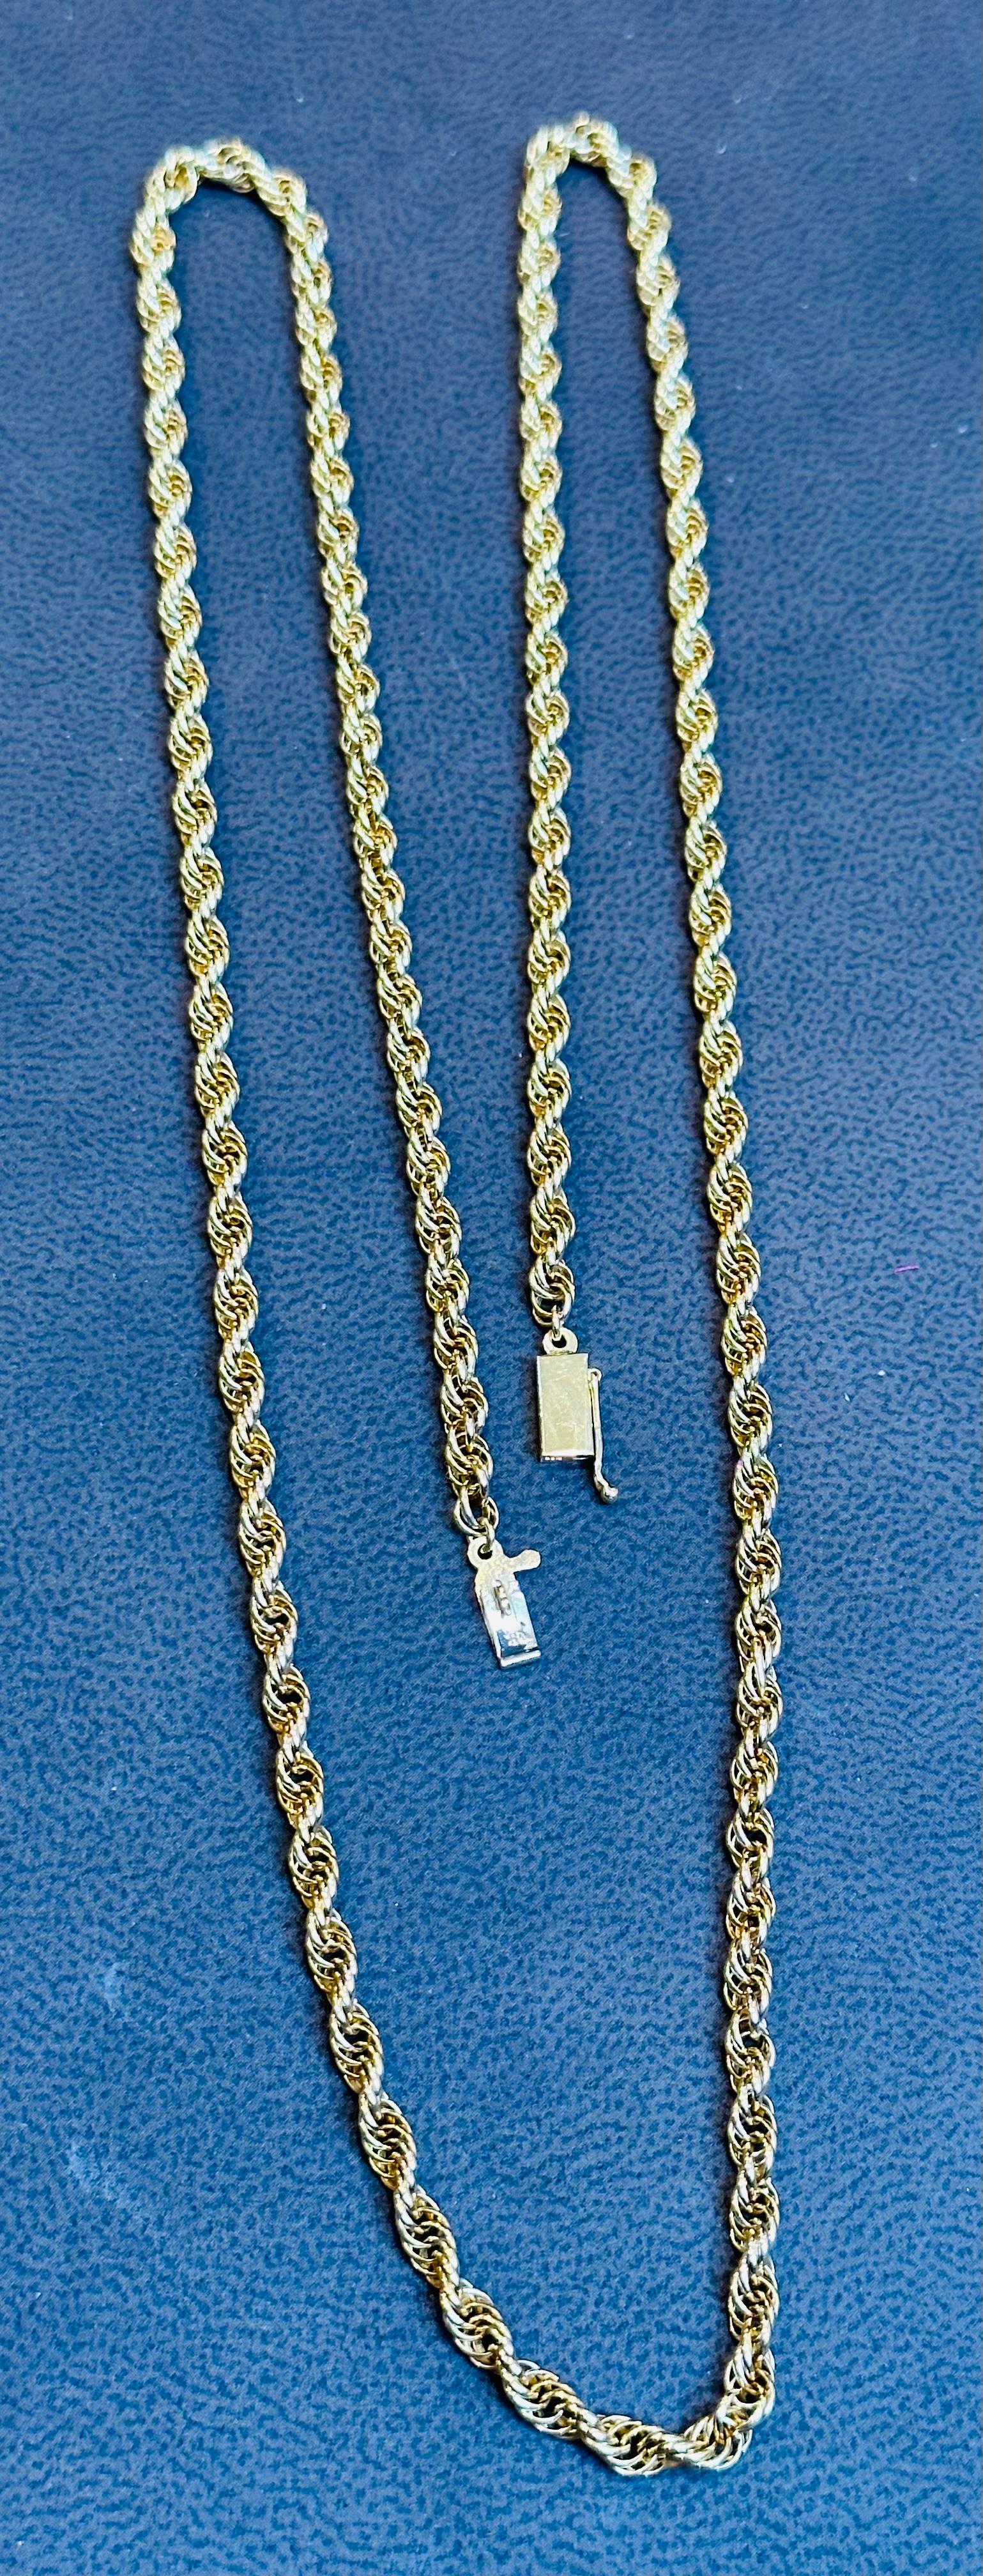 Vintage 14 Karat Yellow Gold 20.5 Gm, Rope Chain Necklace For Sale 2